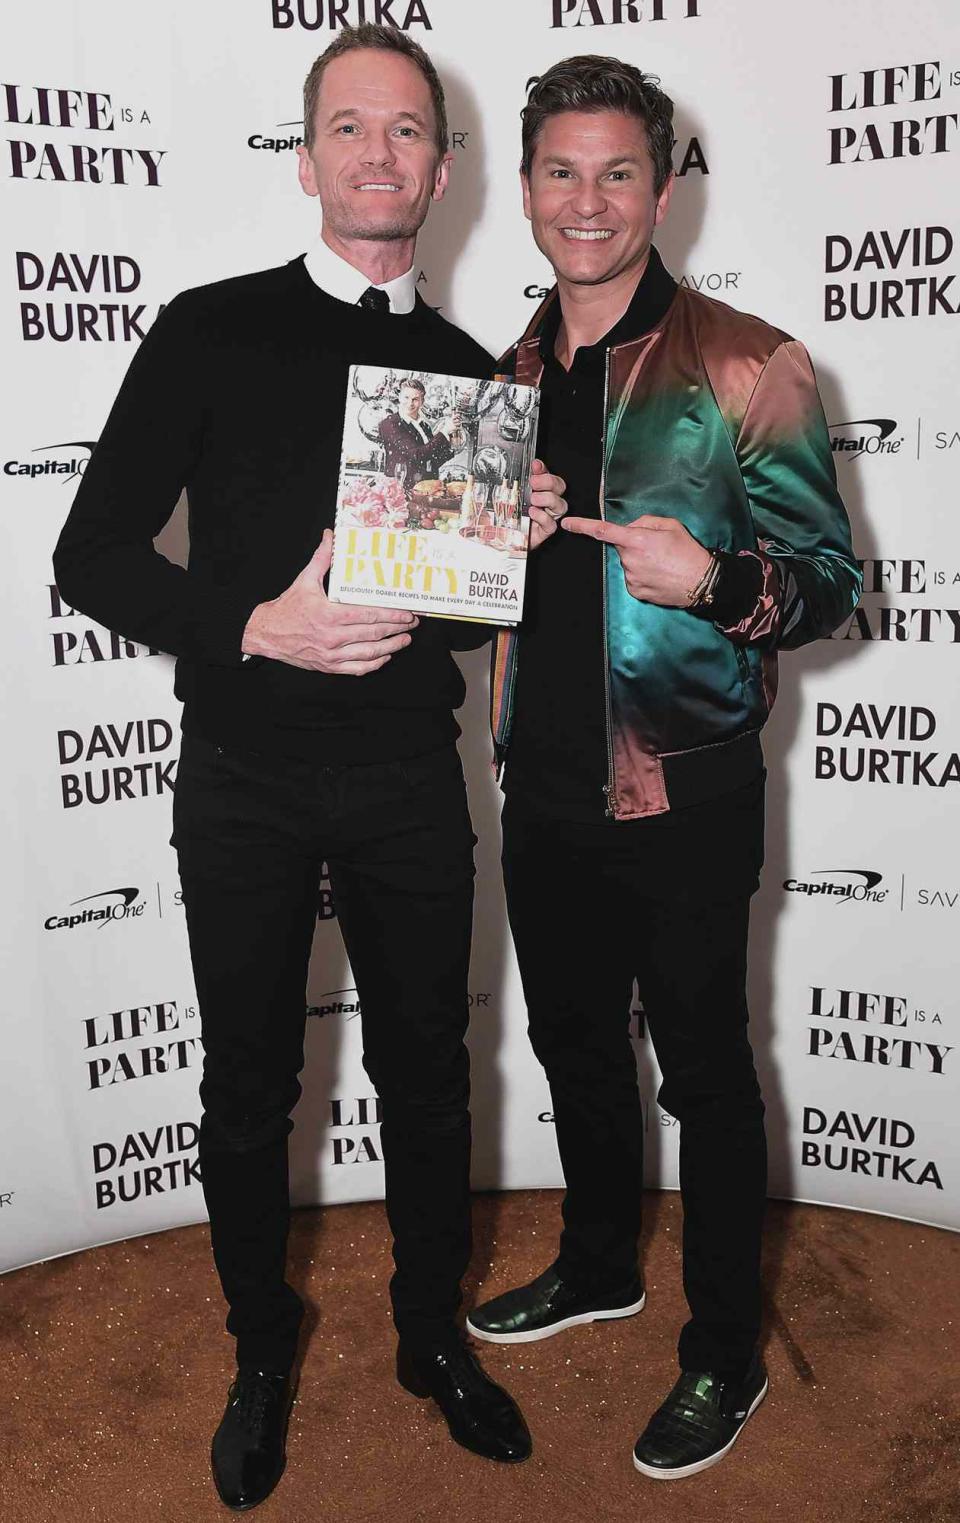 Neil Patrick Harris (L) and David Burtka attend the Launch of Burtka's new cookbook "Life Is A Party" at The Top of The Standard on April 15, 2019 in New York City